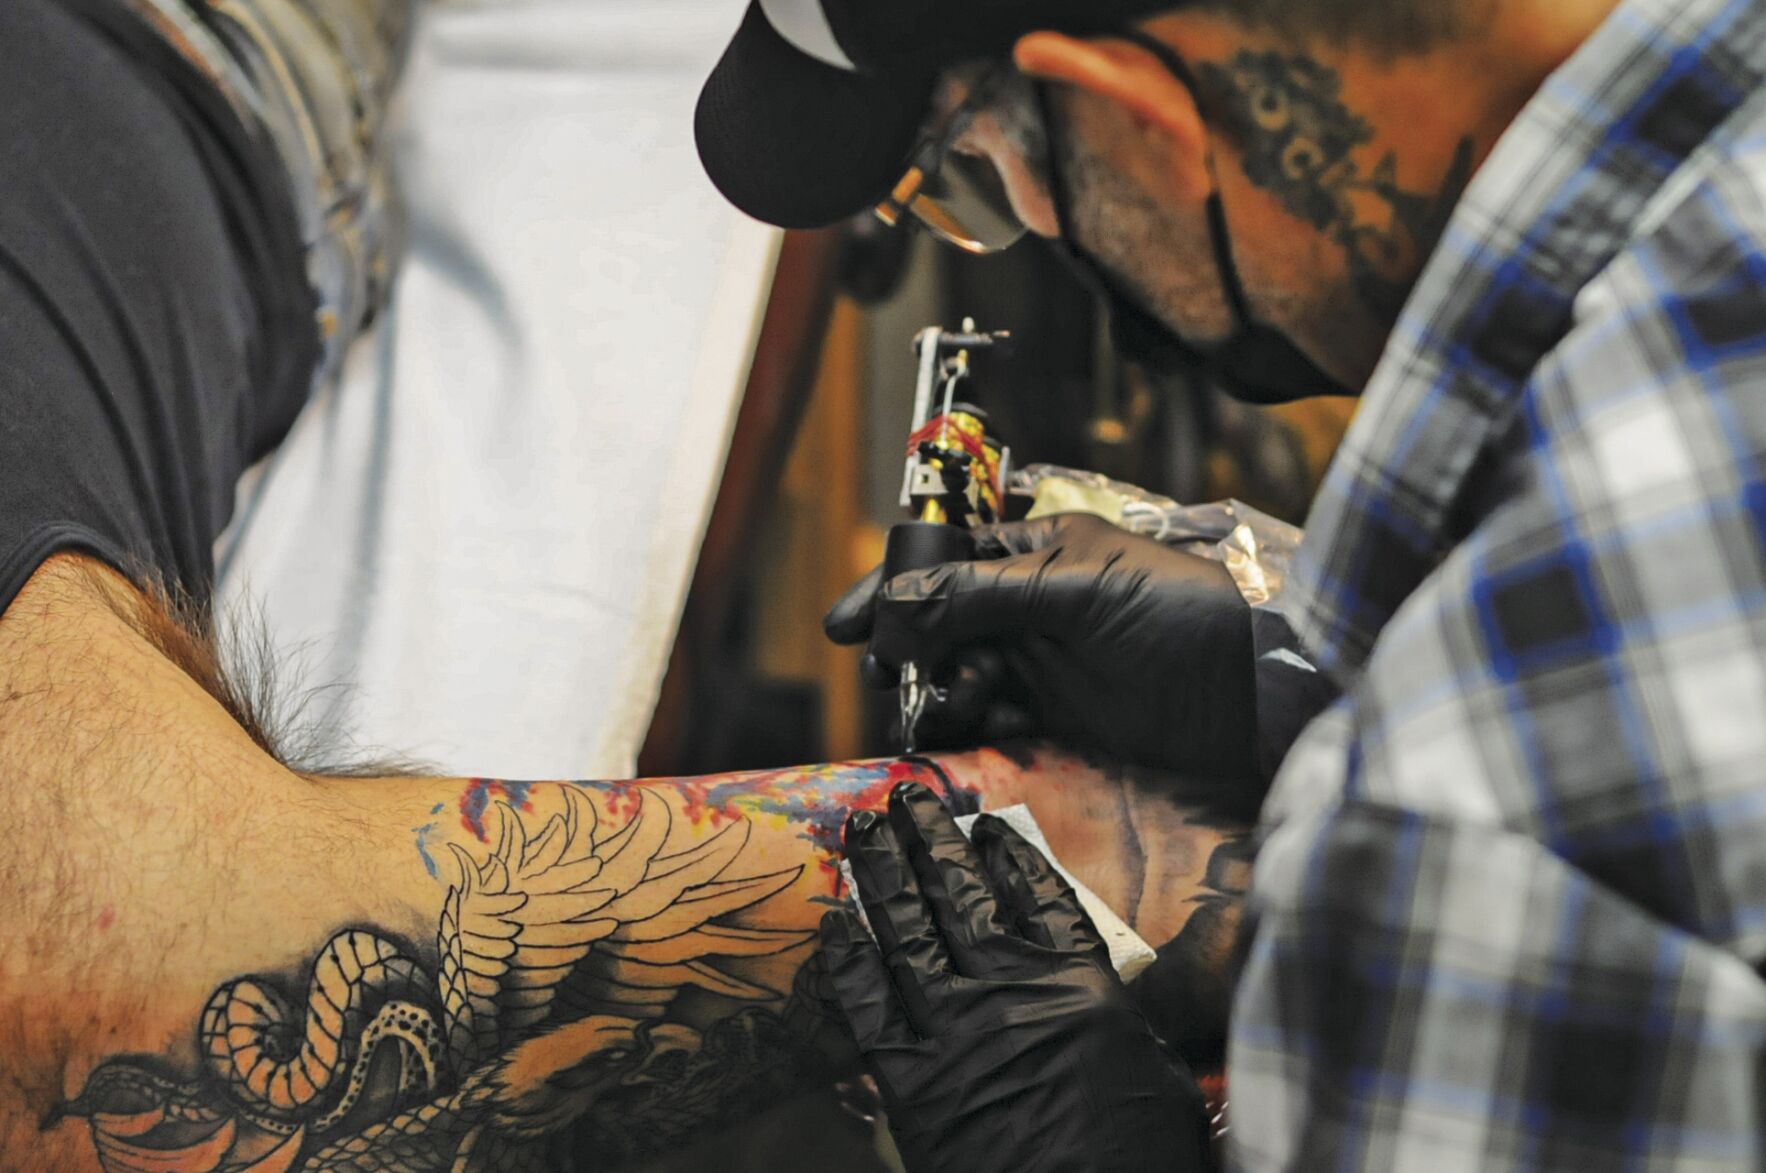 Piercing and Tattoos  symptoms meaning Definition Purpose Description  Risks Normal results